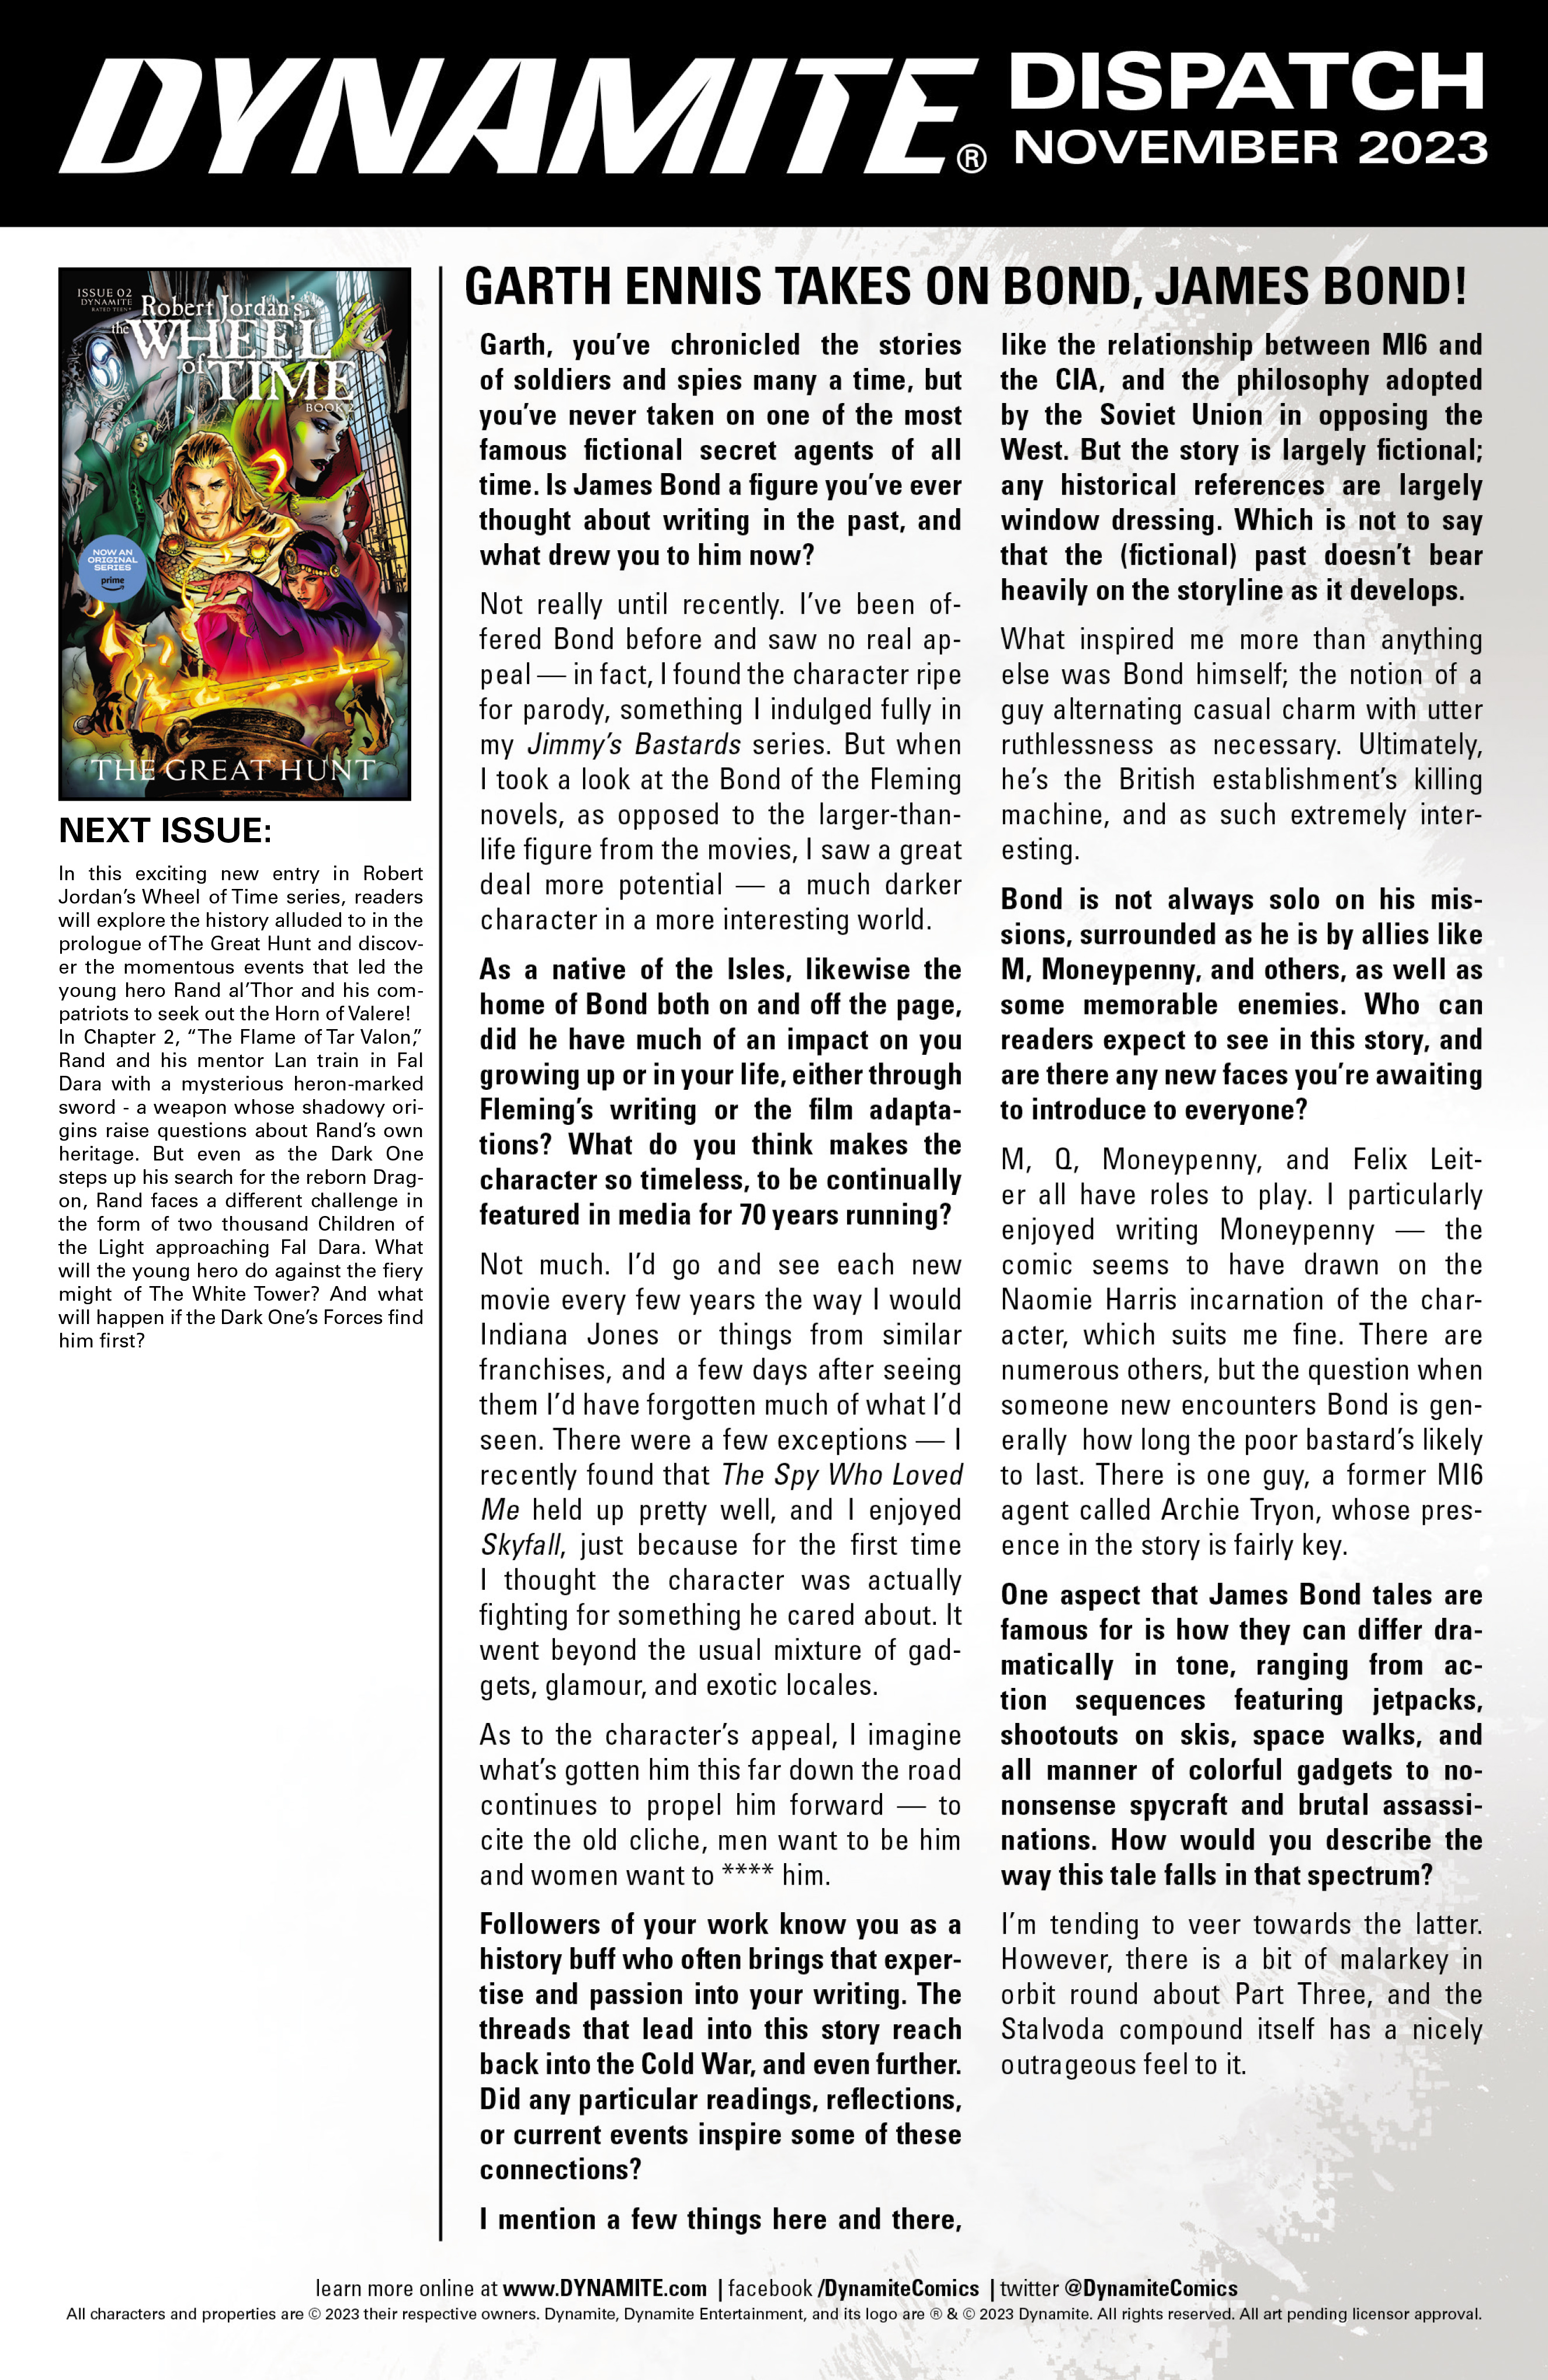 Read online Robert Jordan's The Wheel of Time: The Great Hunt comic -  Issue #1 - 23